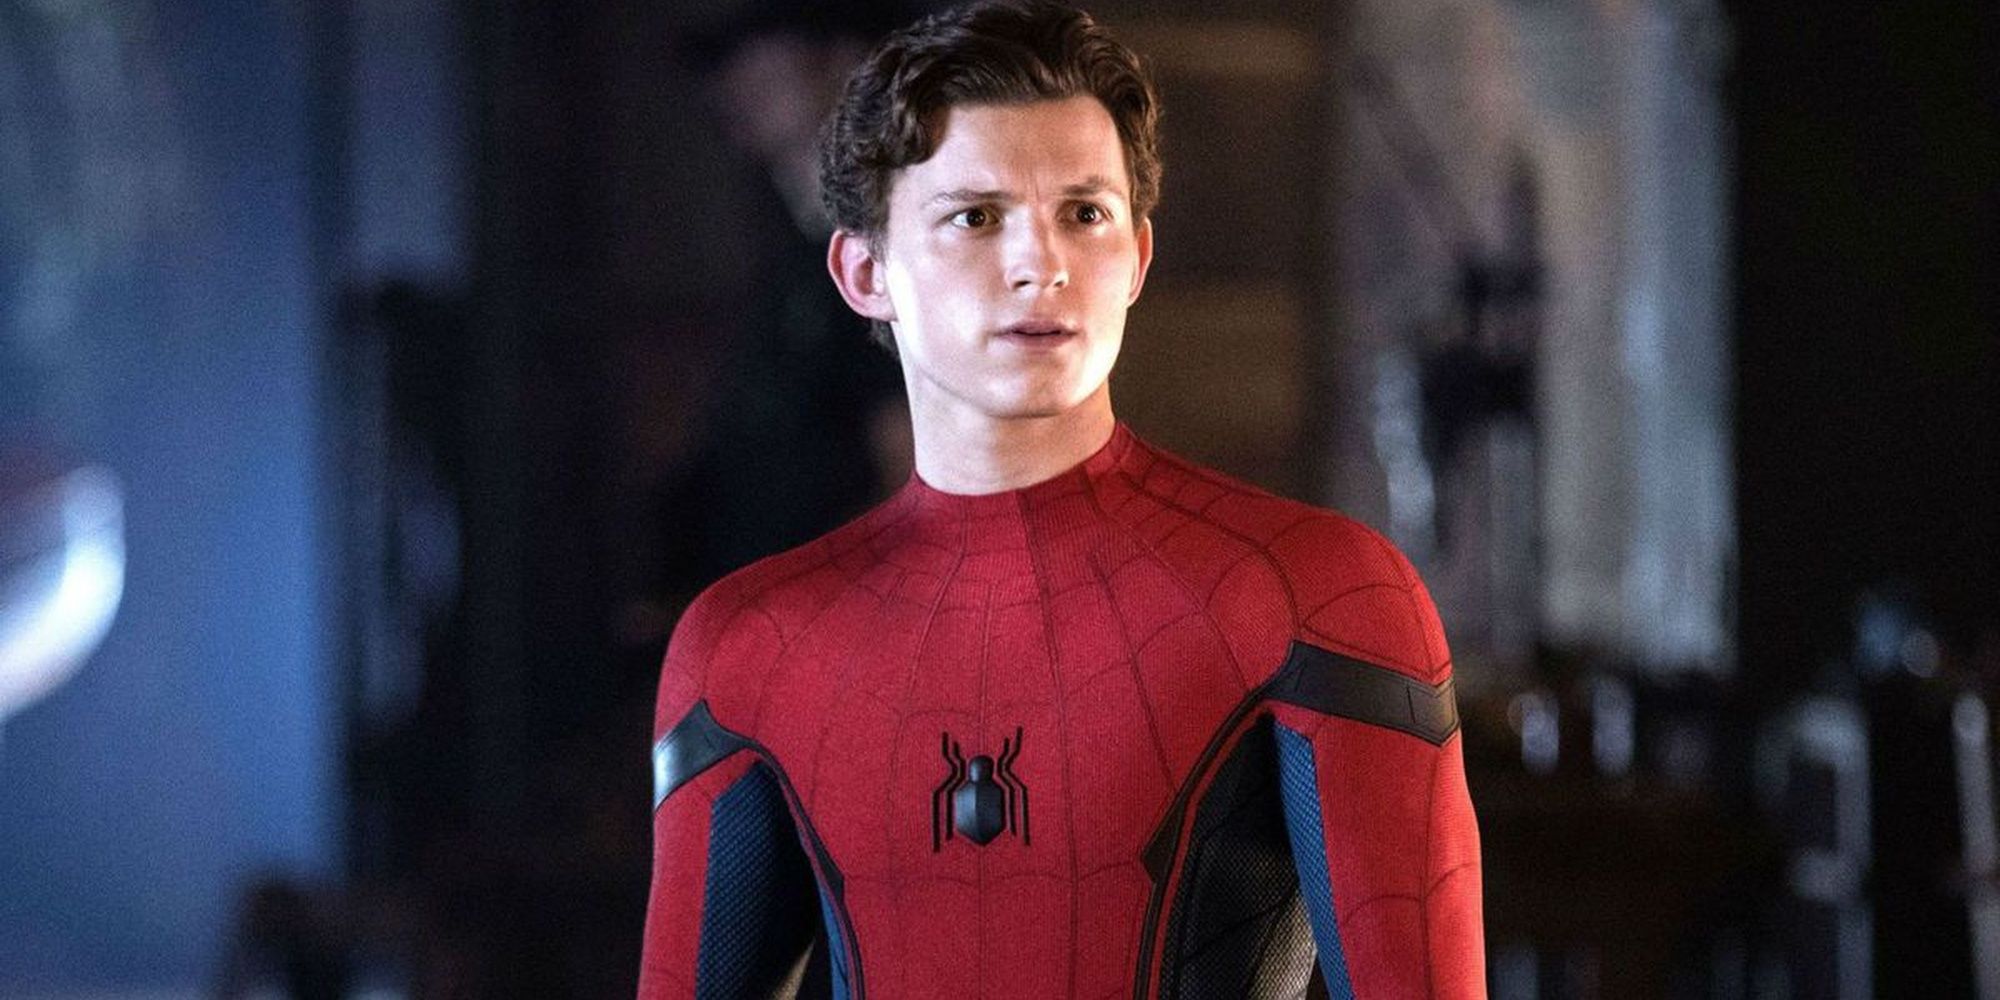 Spider-Man without his mask on looking confused in Spider-Man: Far From Home